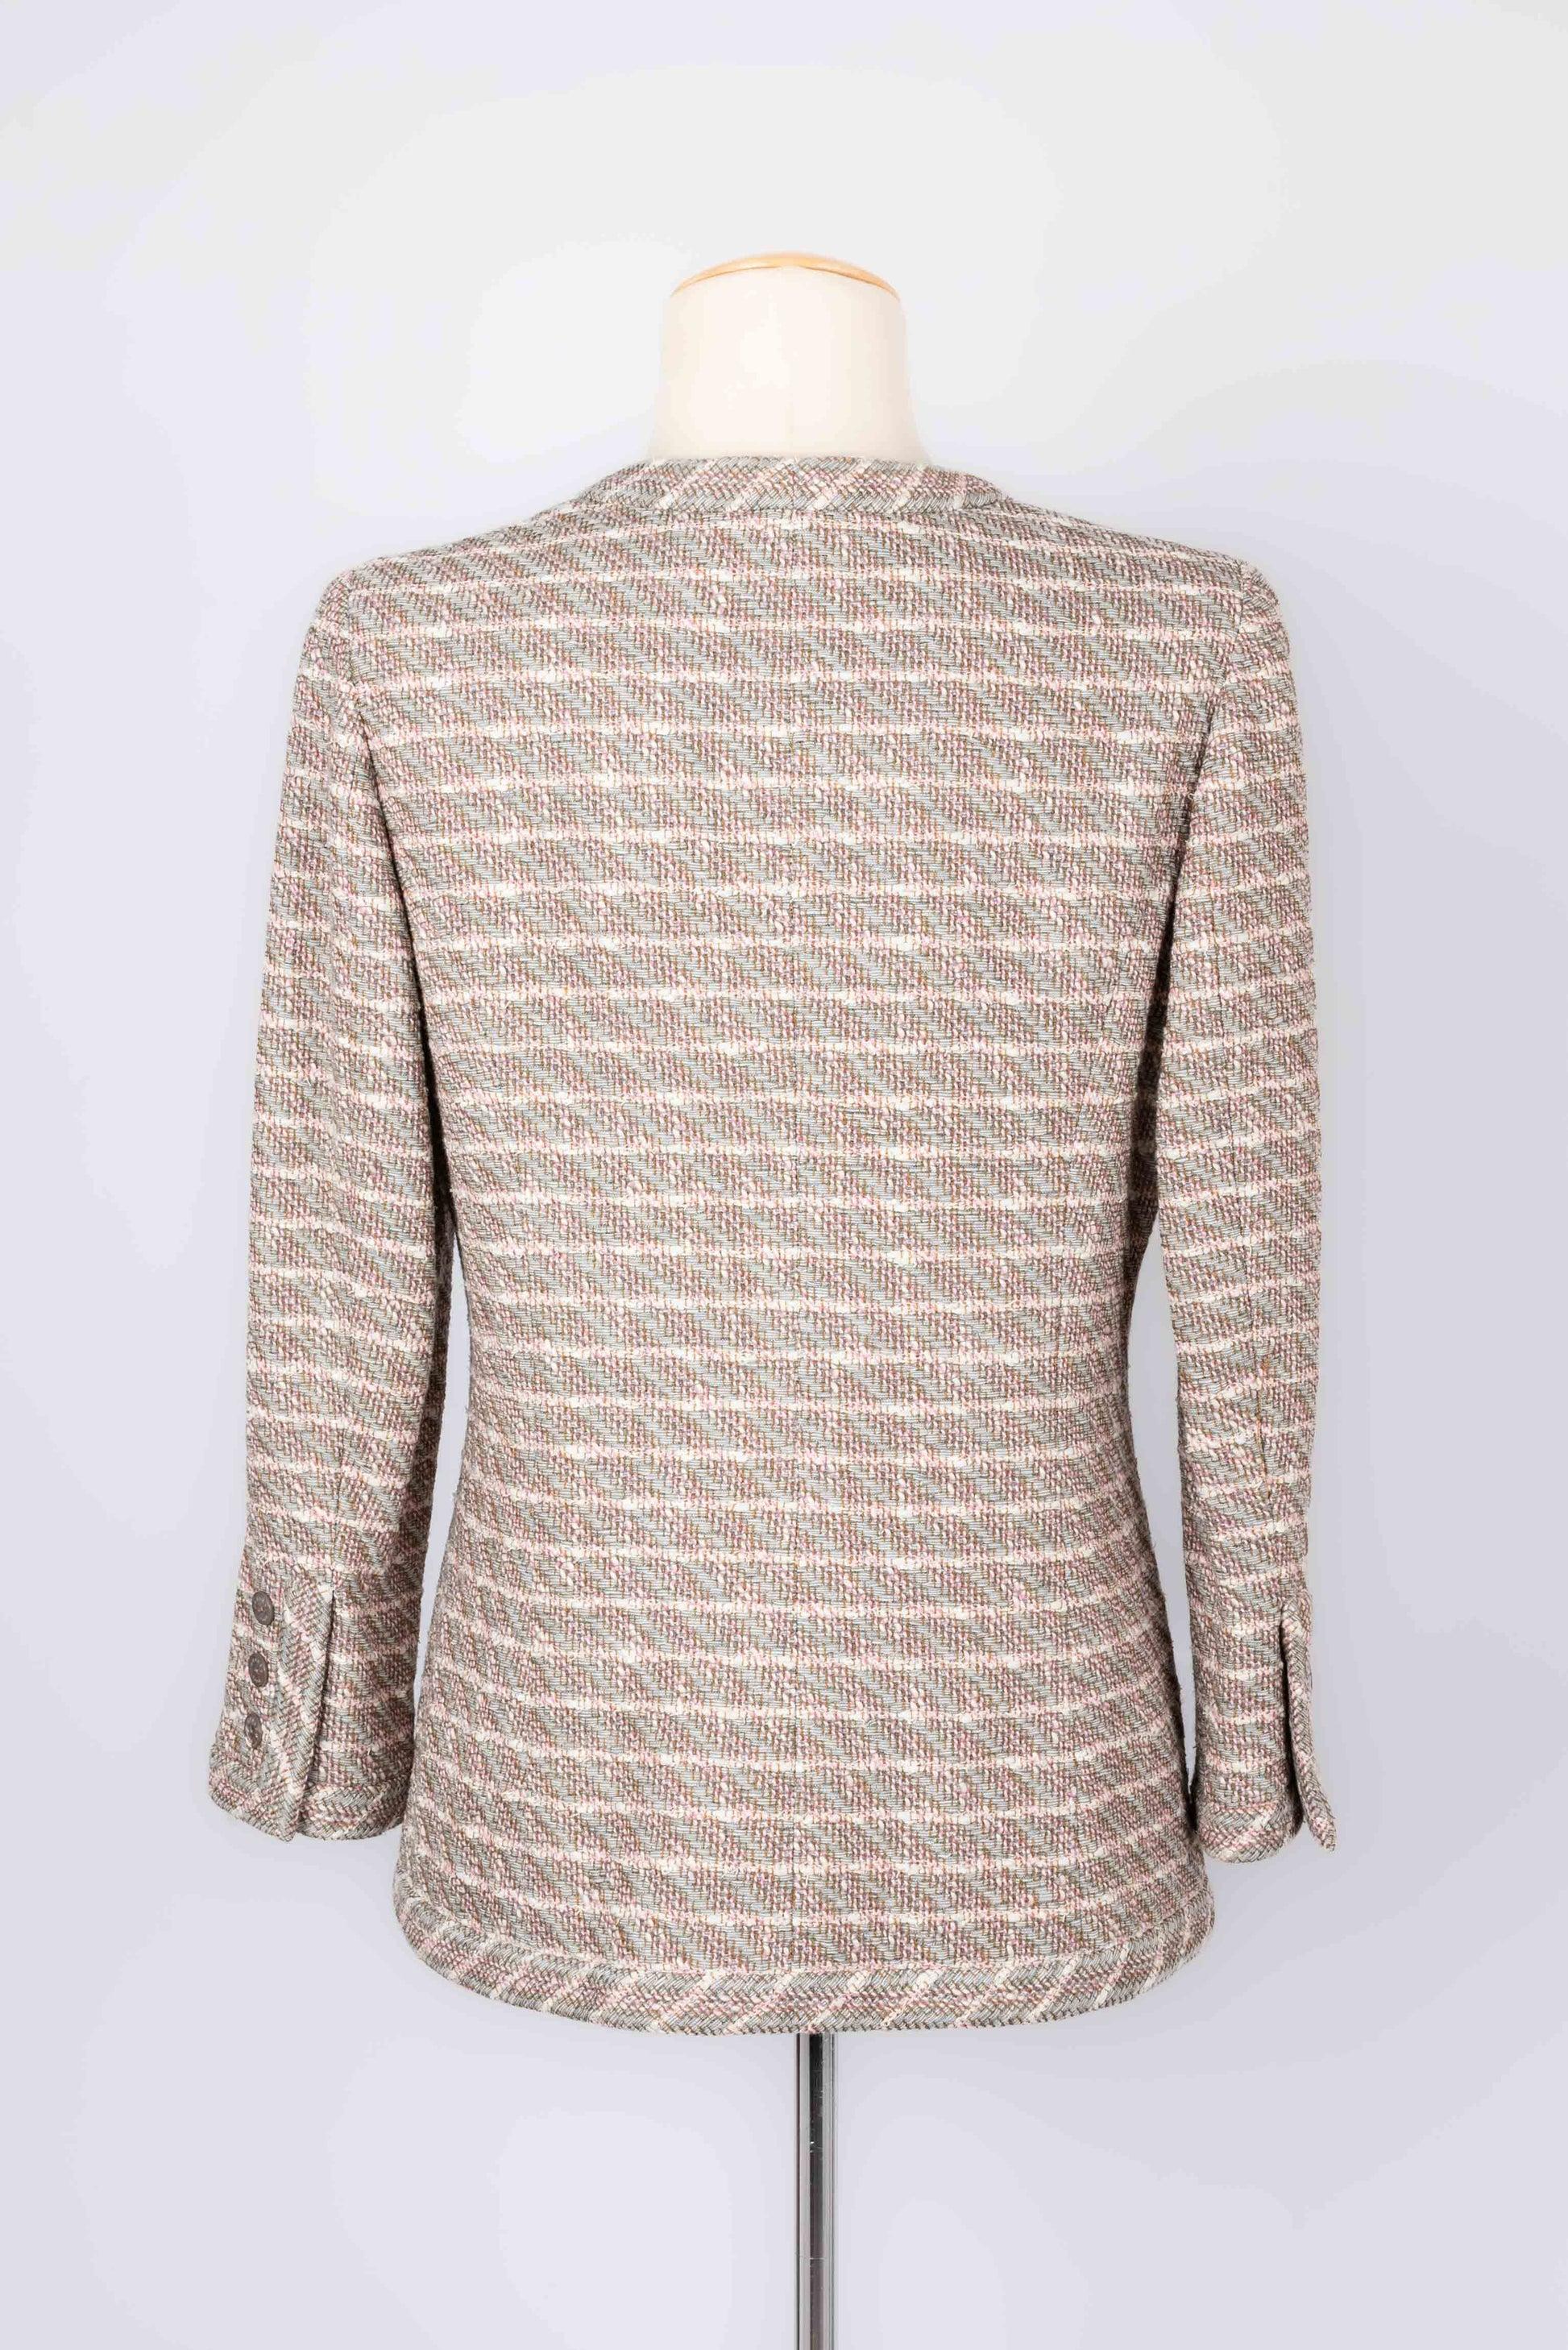 Chanel Tweed Jacket with Silk Lining, 2003 In Excellent Condition For Sale In SAINT-OUEN-SUR-SEINE, FR